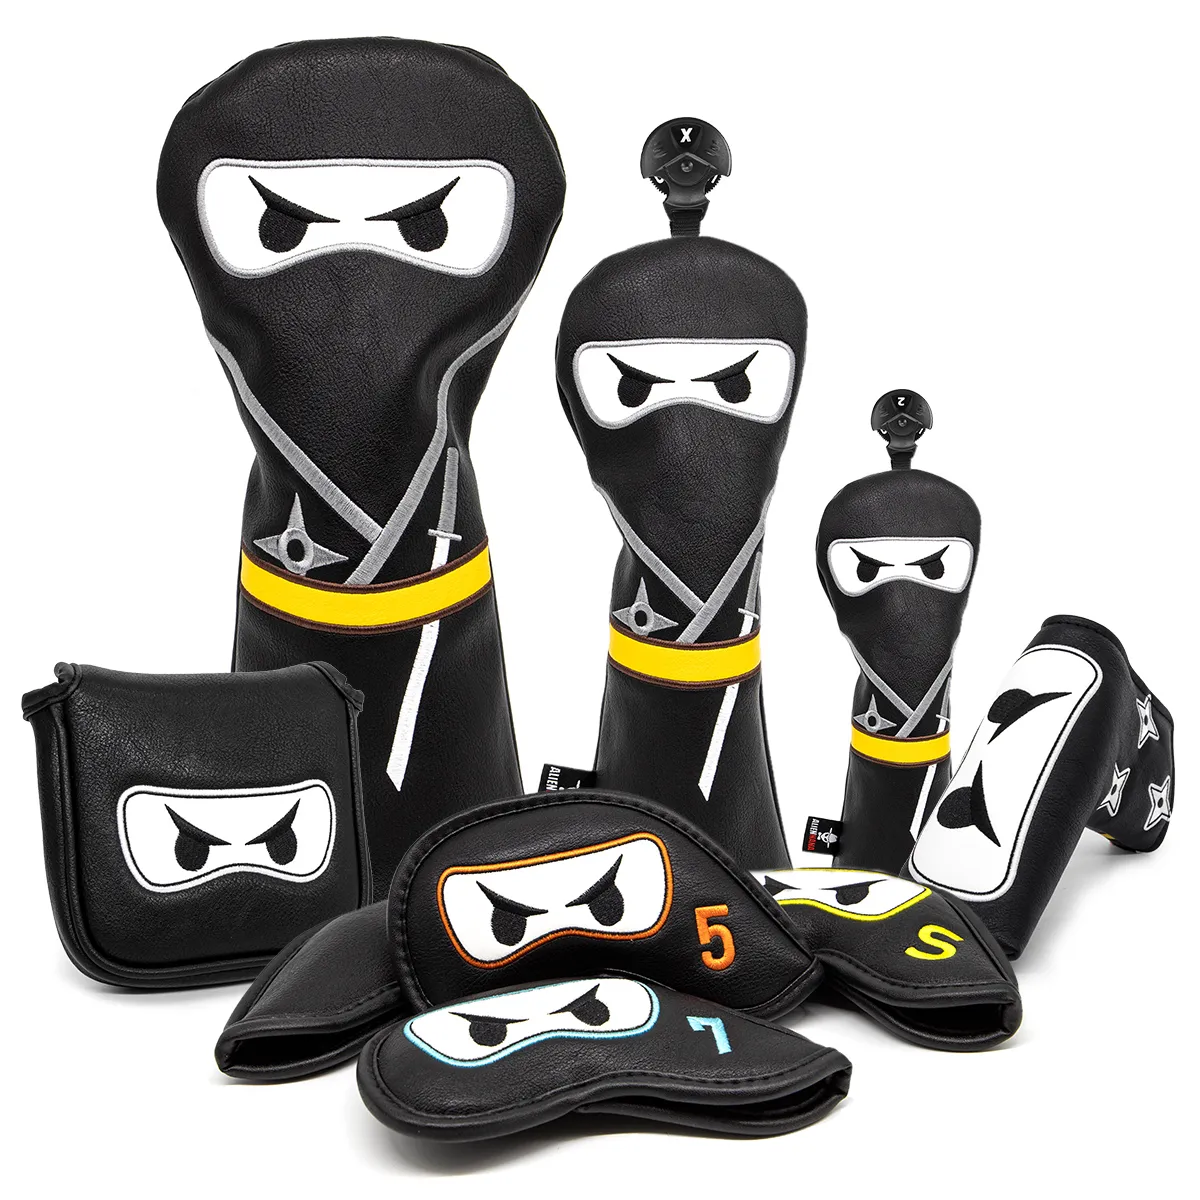 Andere Golf Products Club Headcover Set Aliennana Black Ninja Driver Head Cover Fairway Headcvoer Hybird Blade Putter Mallet Putter Covers 230413